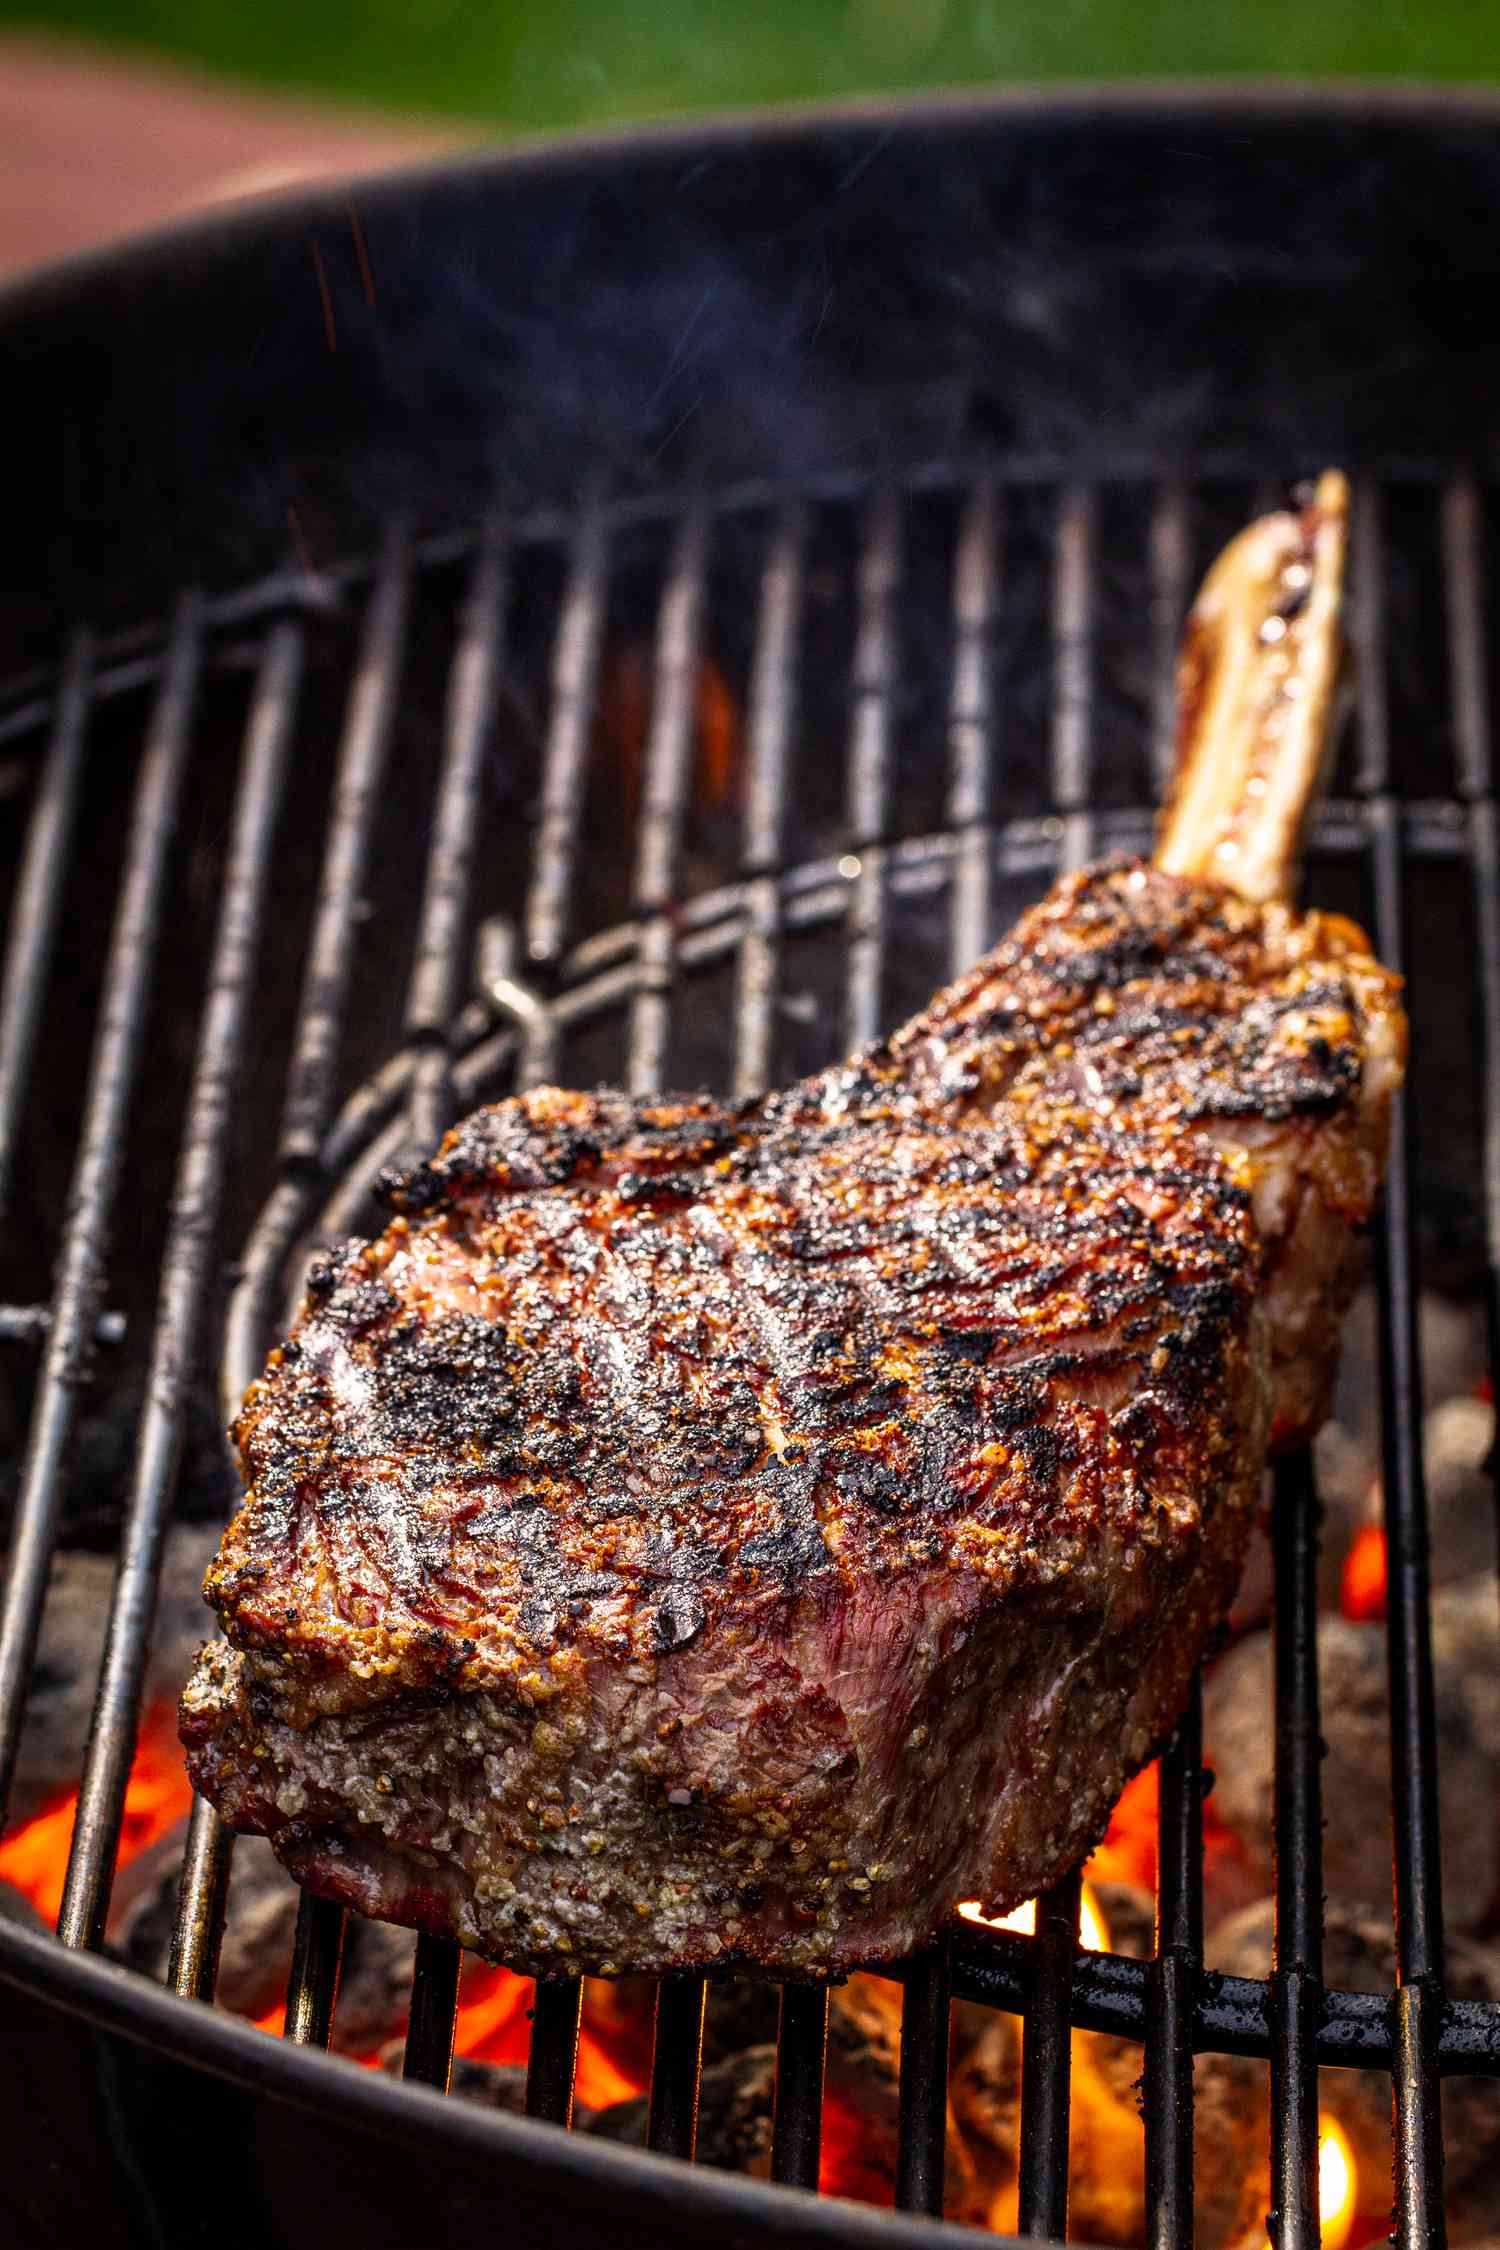 Simply-Recipes-Grilling-Meat-Guide-LEAD-07-TomahawkSteak-34ea6b017b4645a28c243b14aedb85d0